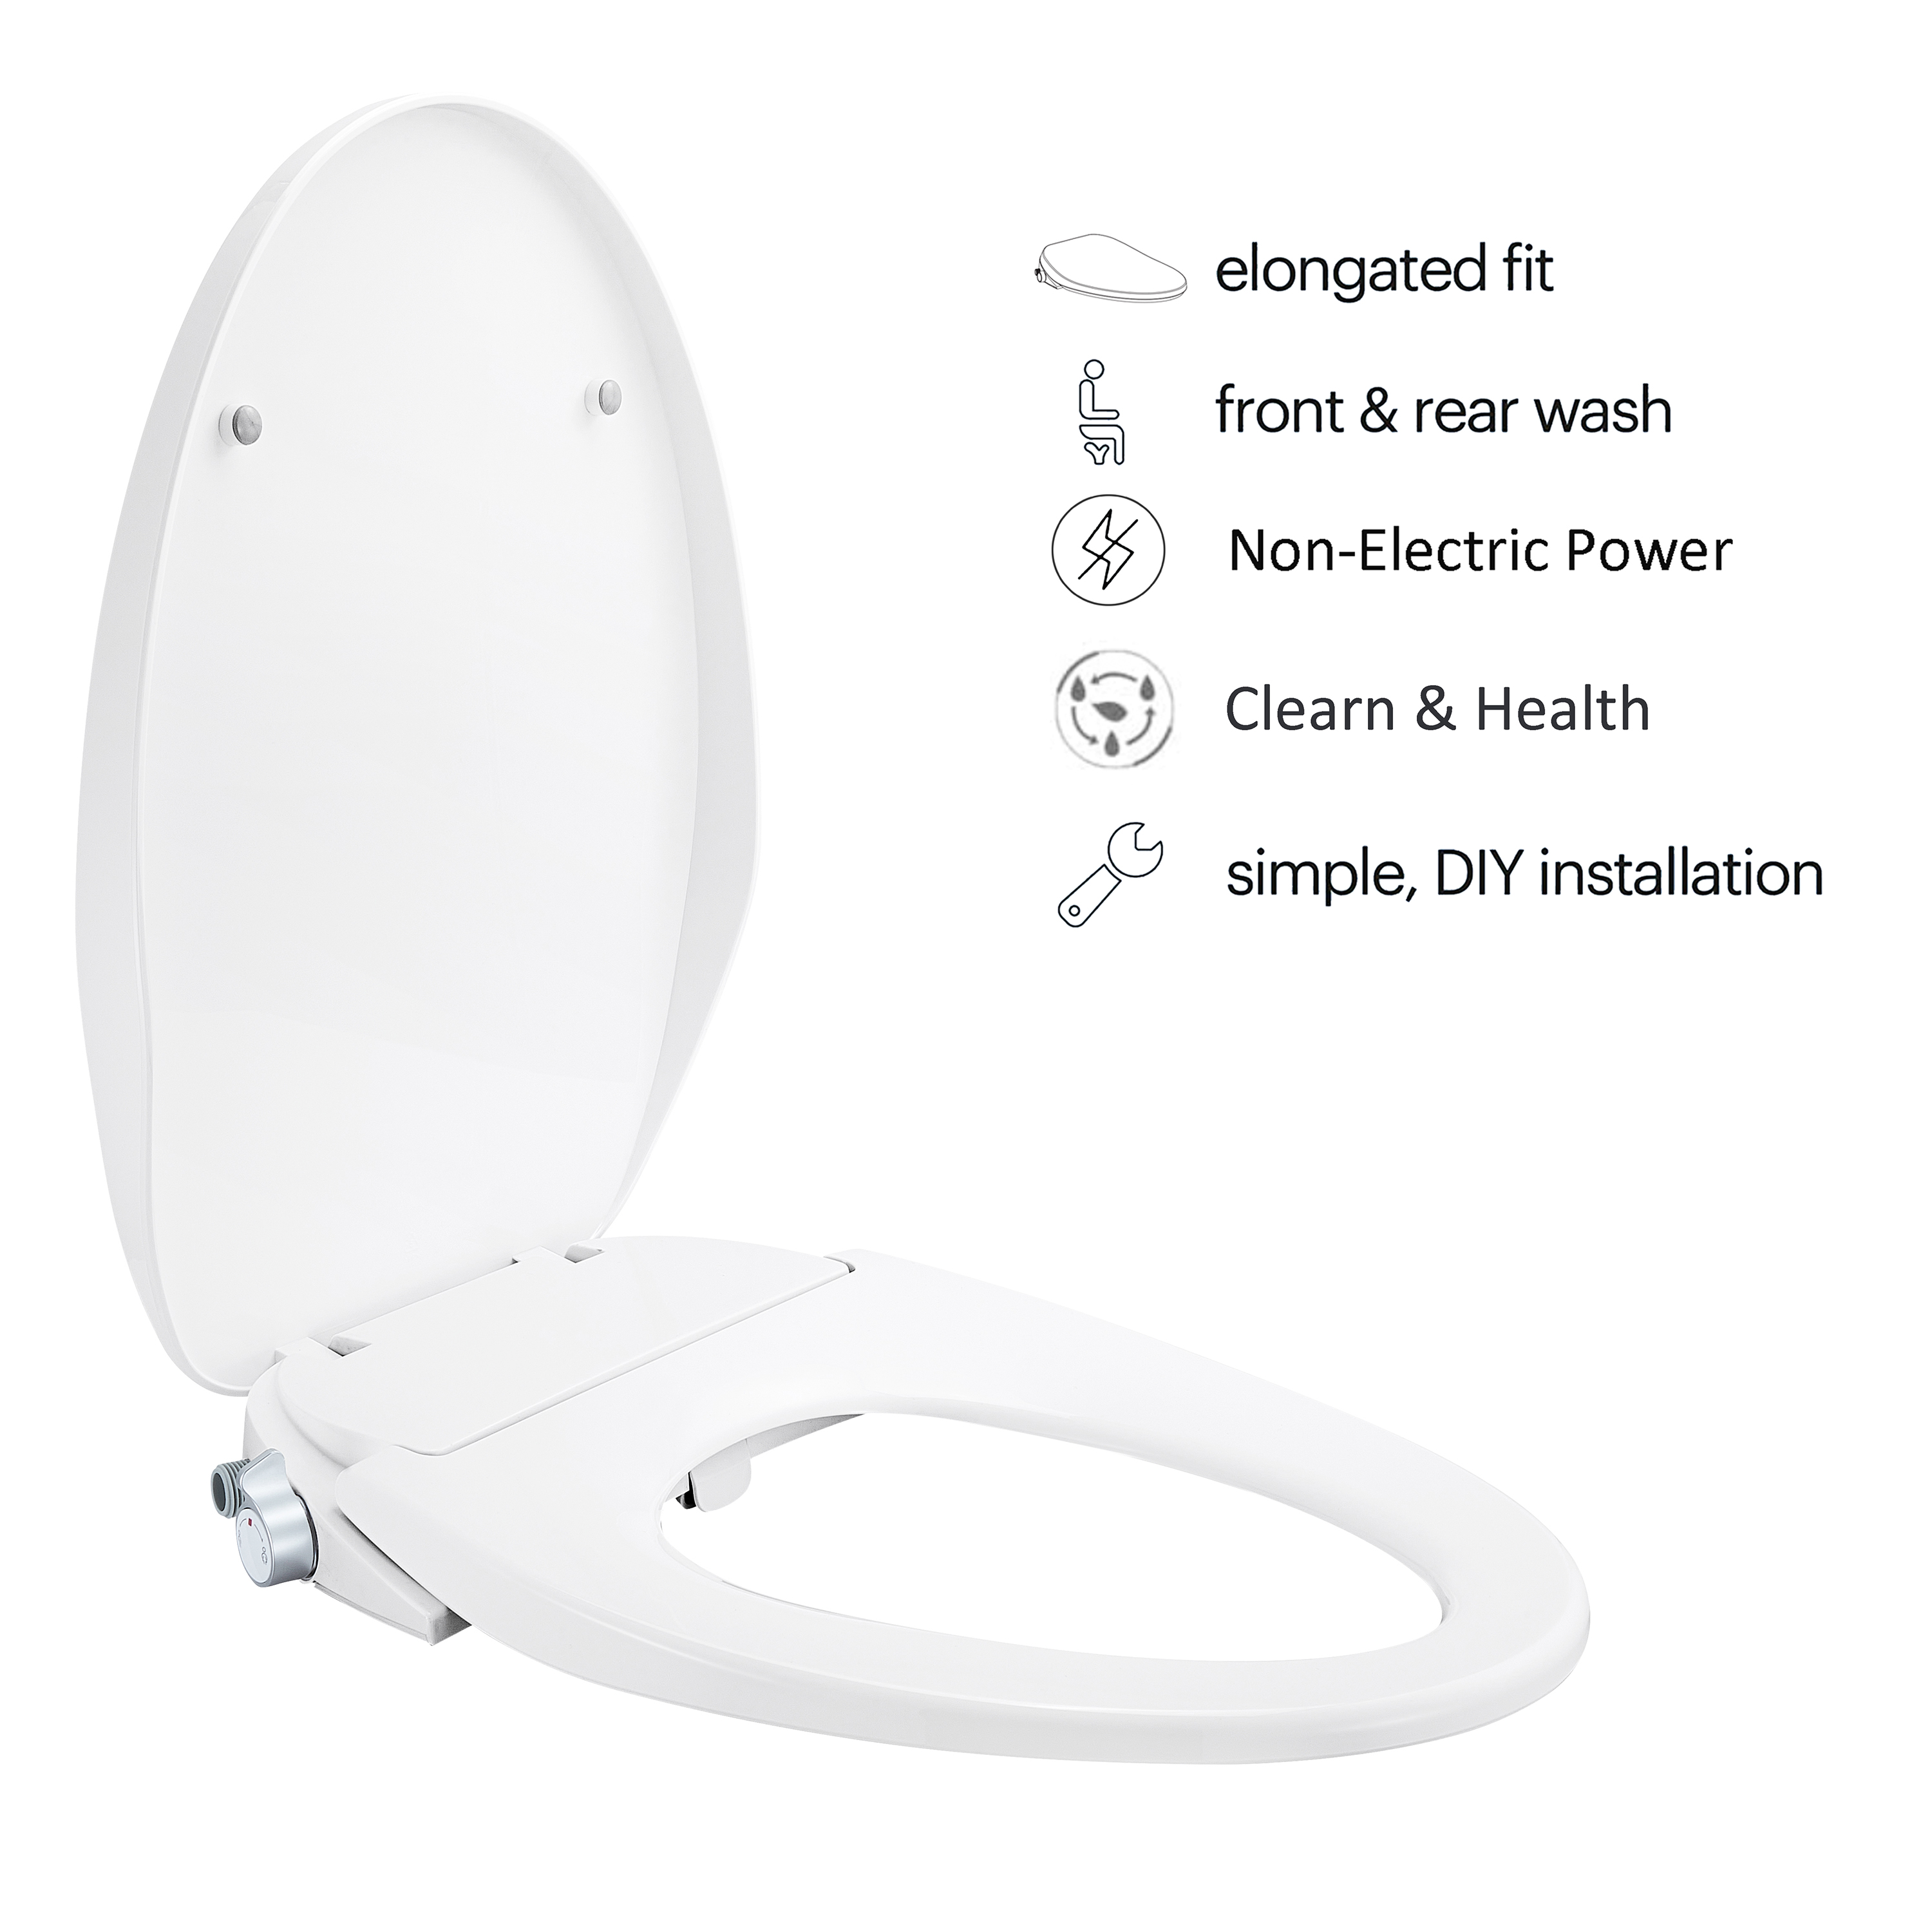 MEJE #VB-L Non-Electric Bidet Toilet Seat, Fits Elongated Toilets, White – Dual Nozzle with Adjustable Sprayers,Easy Installation…